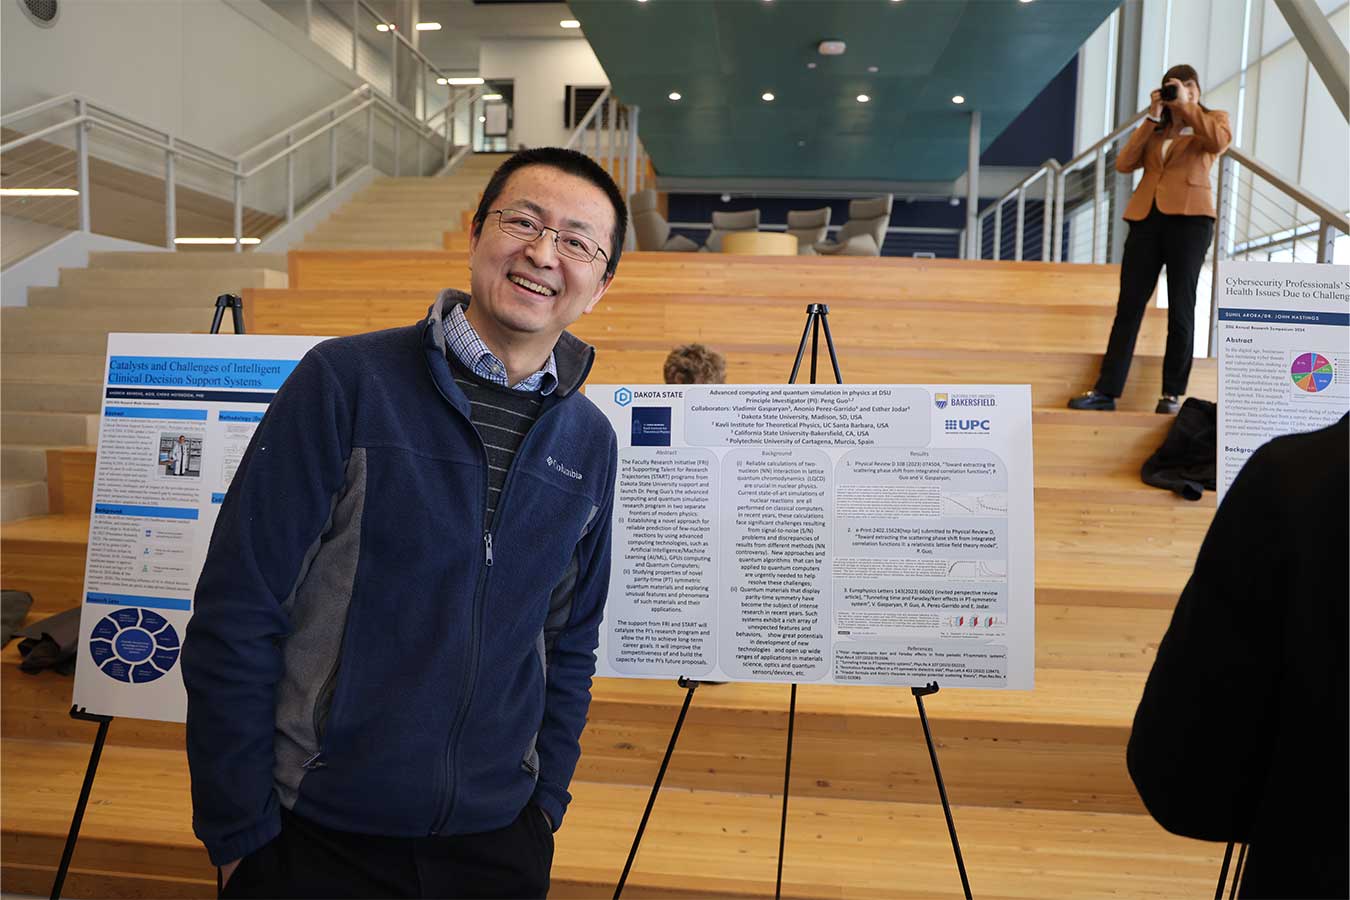 Dr. Peng Guo with a poster about his quantum physics research.